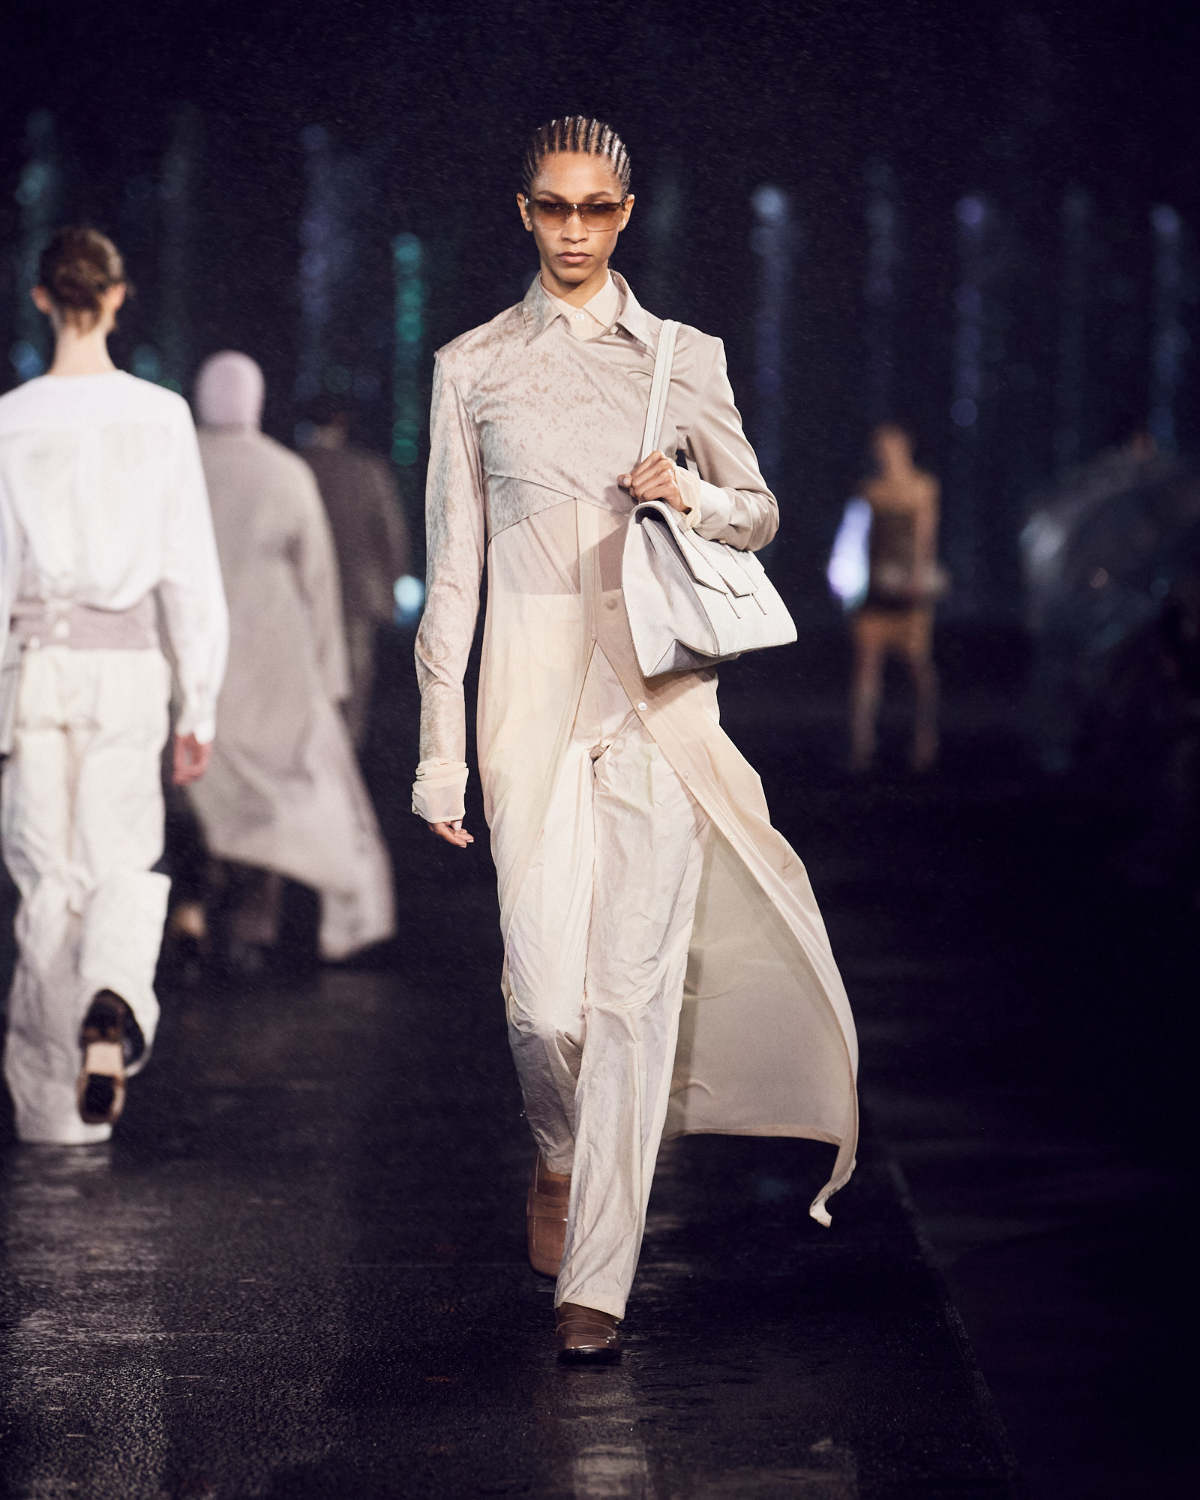 Hugo Boss BOSS Presents Its New Spring/Summer 2023 Collection Luxferity